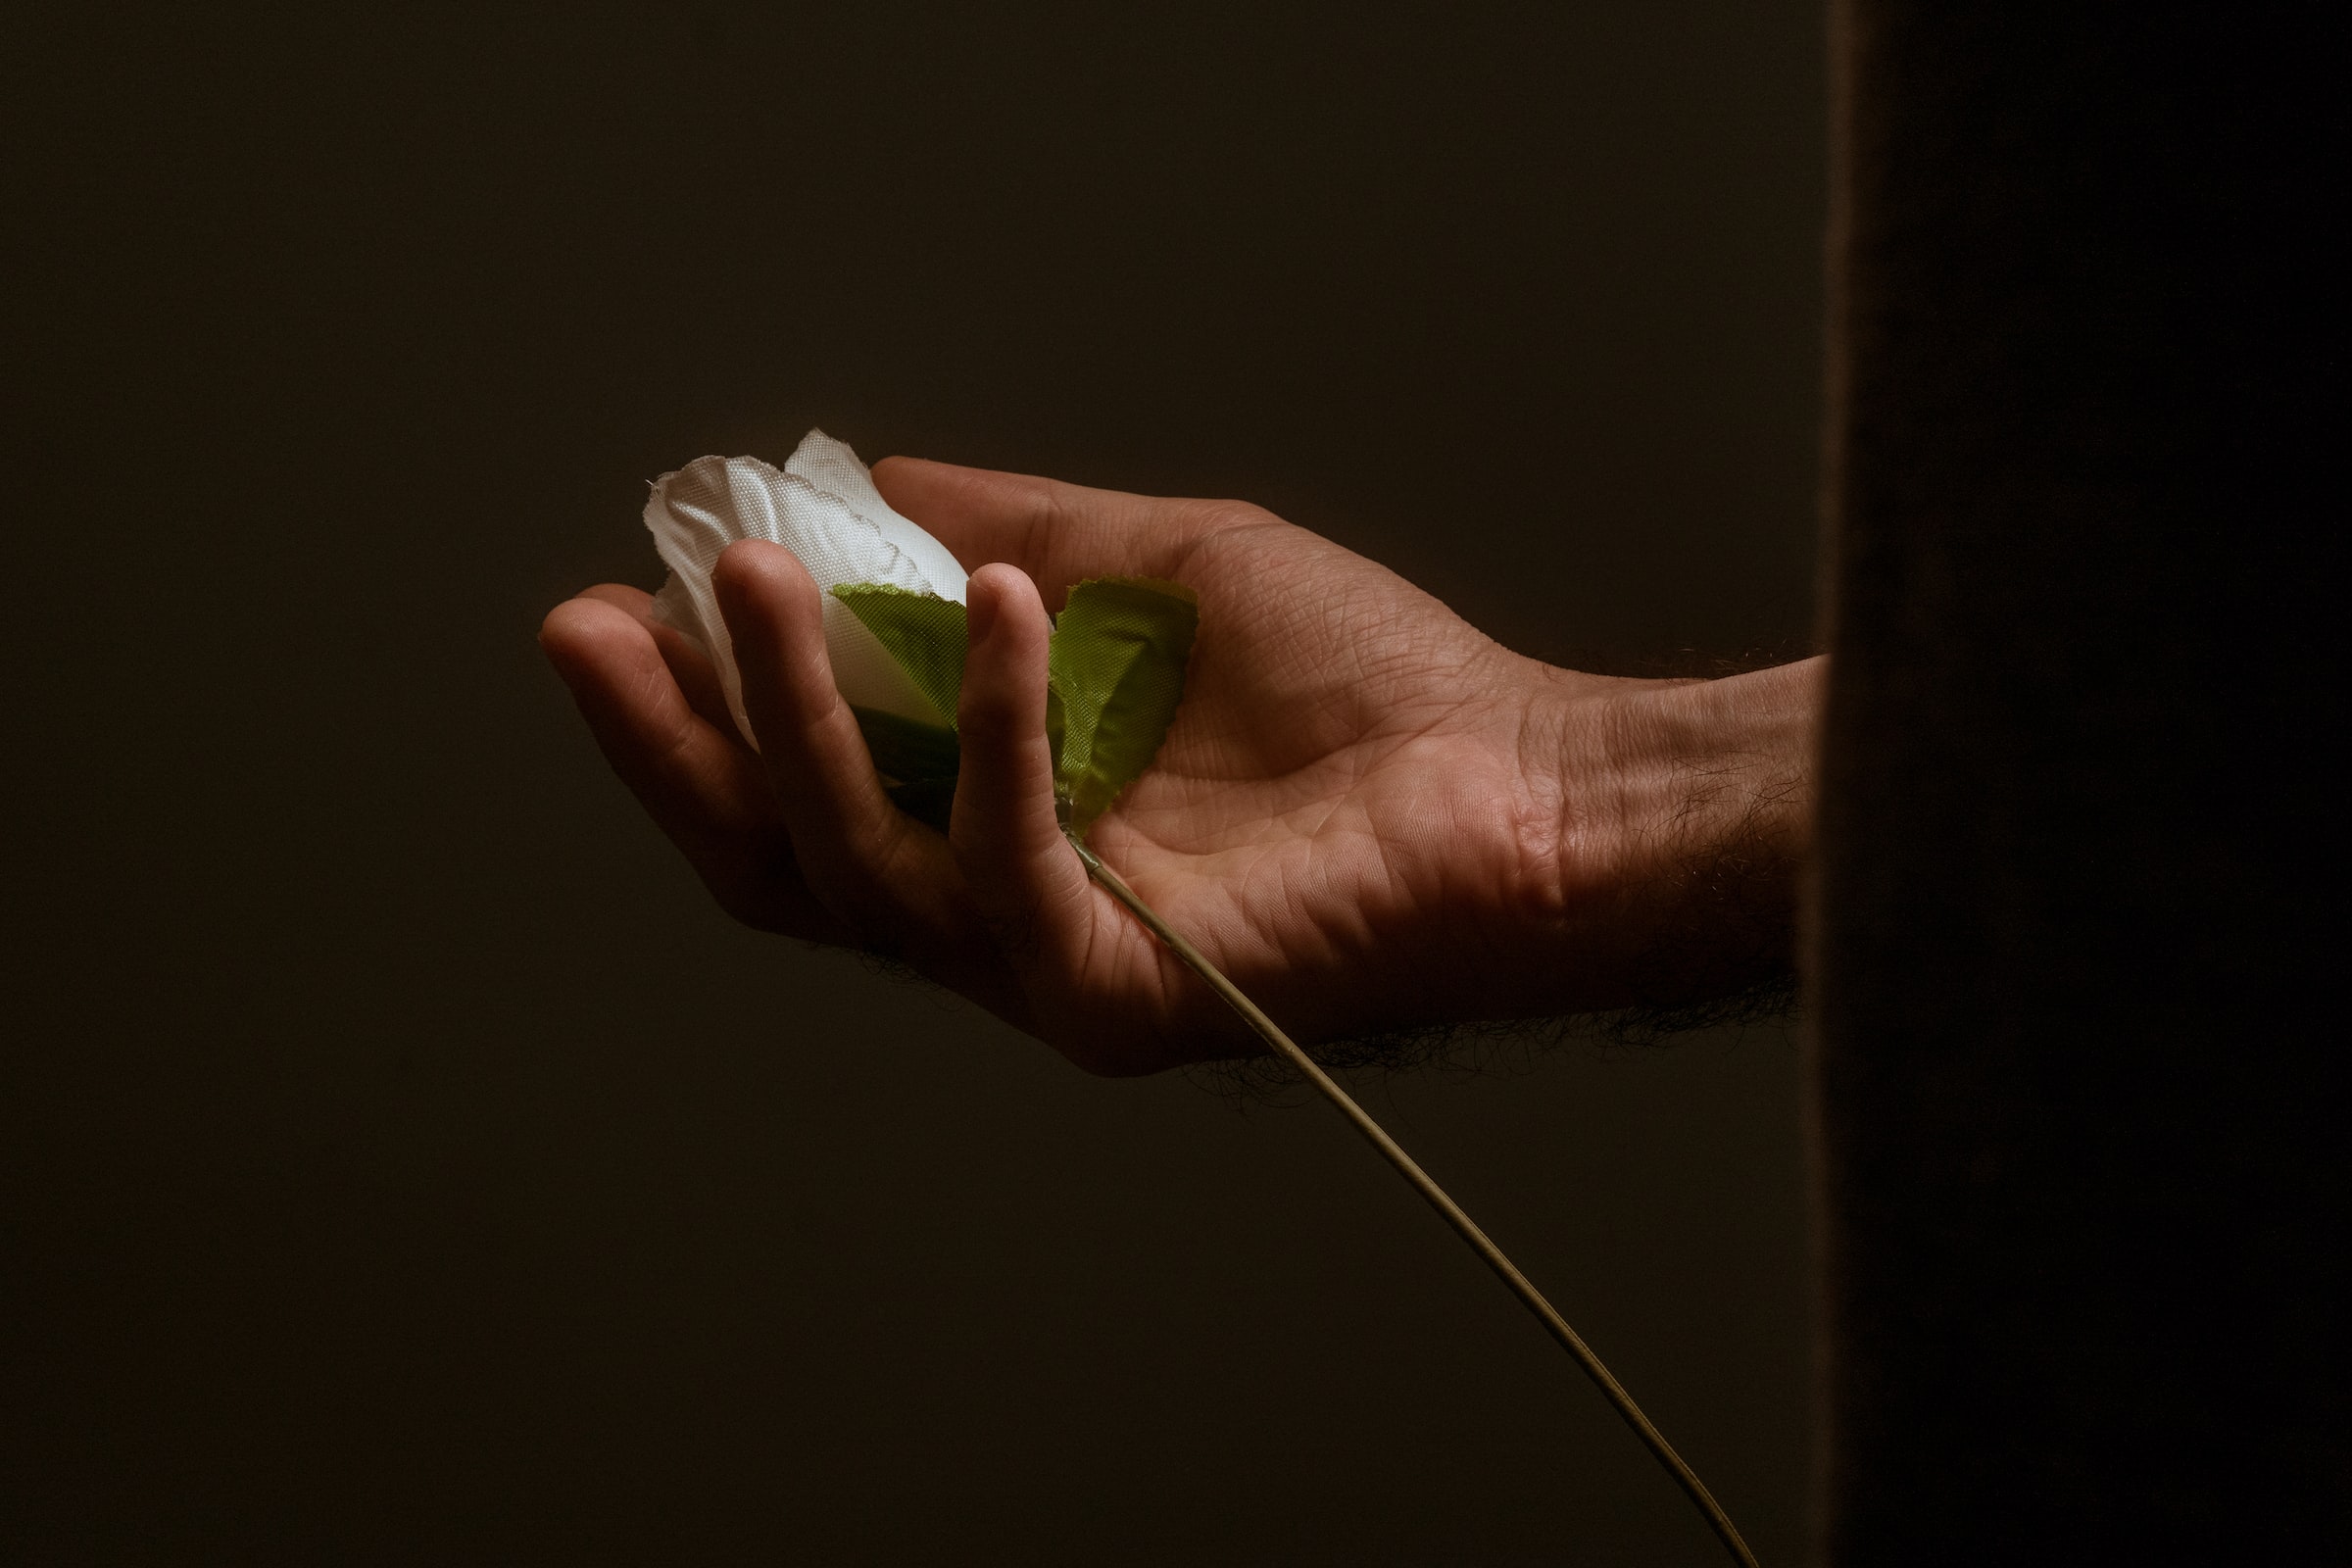 A person holding a white rose | Source: Unsplash